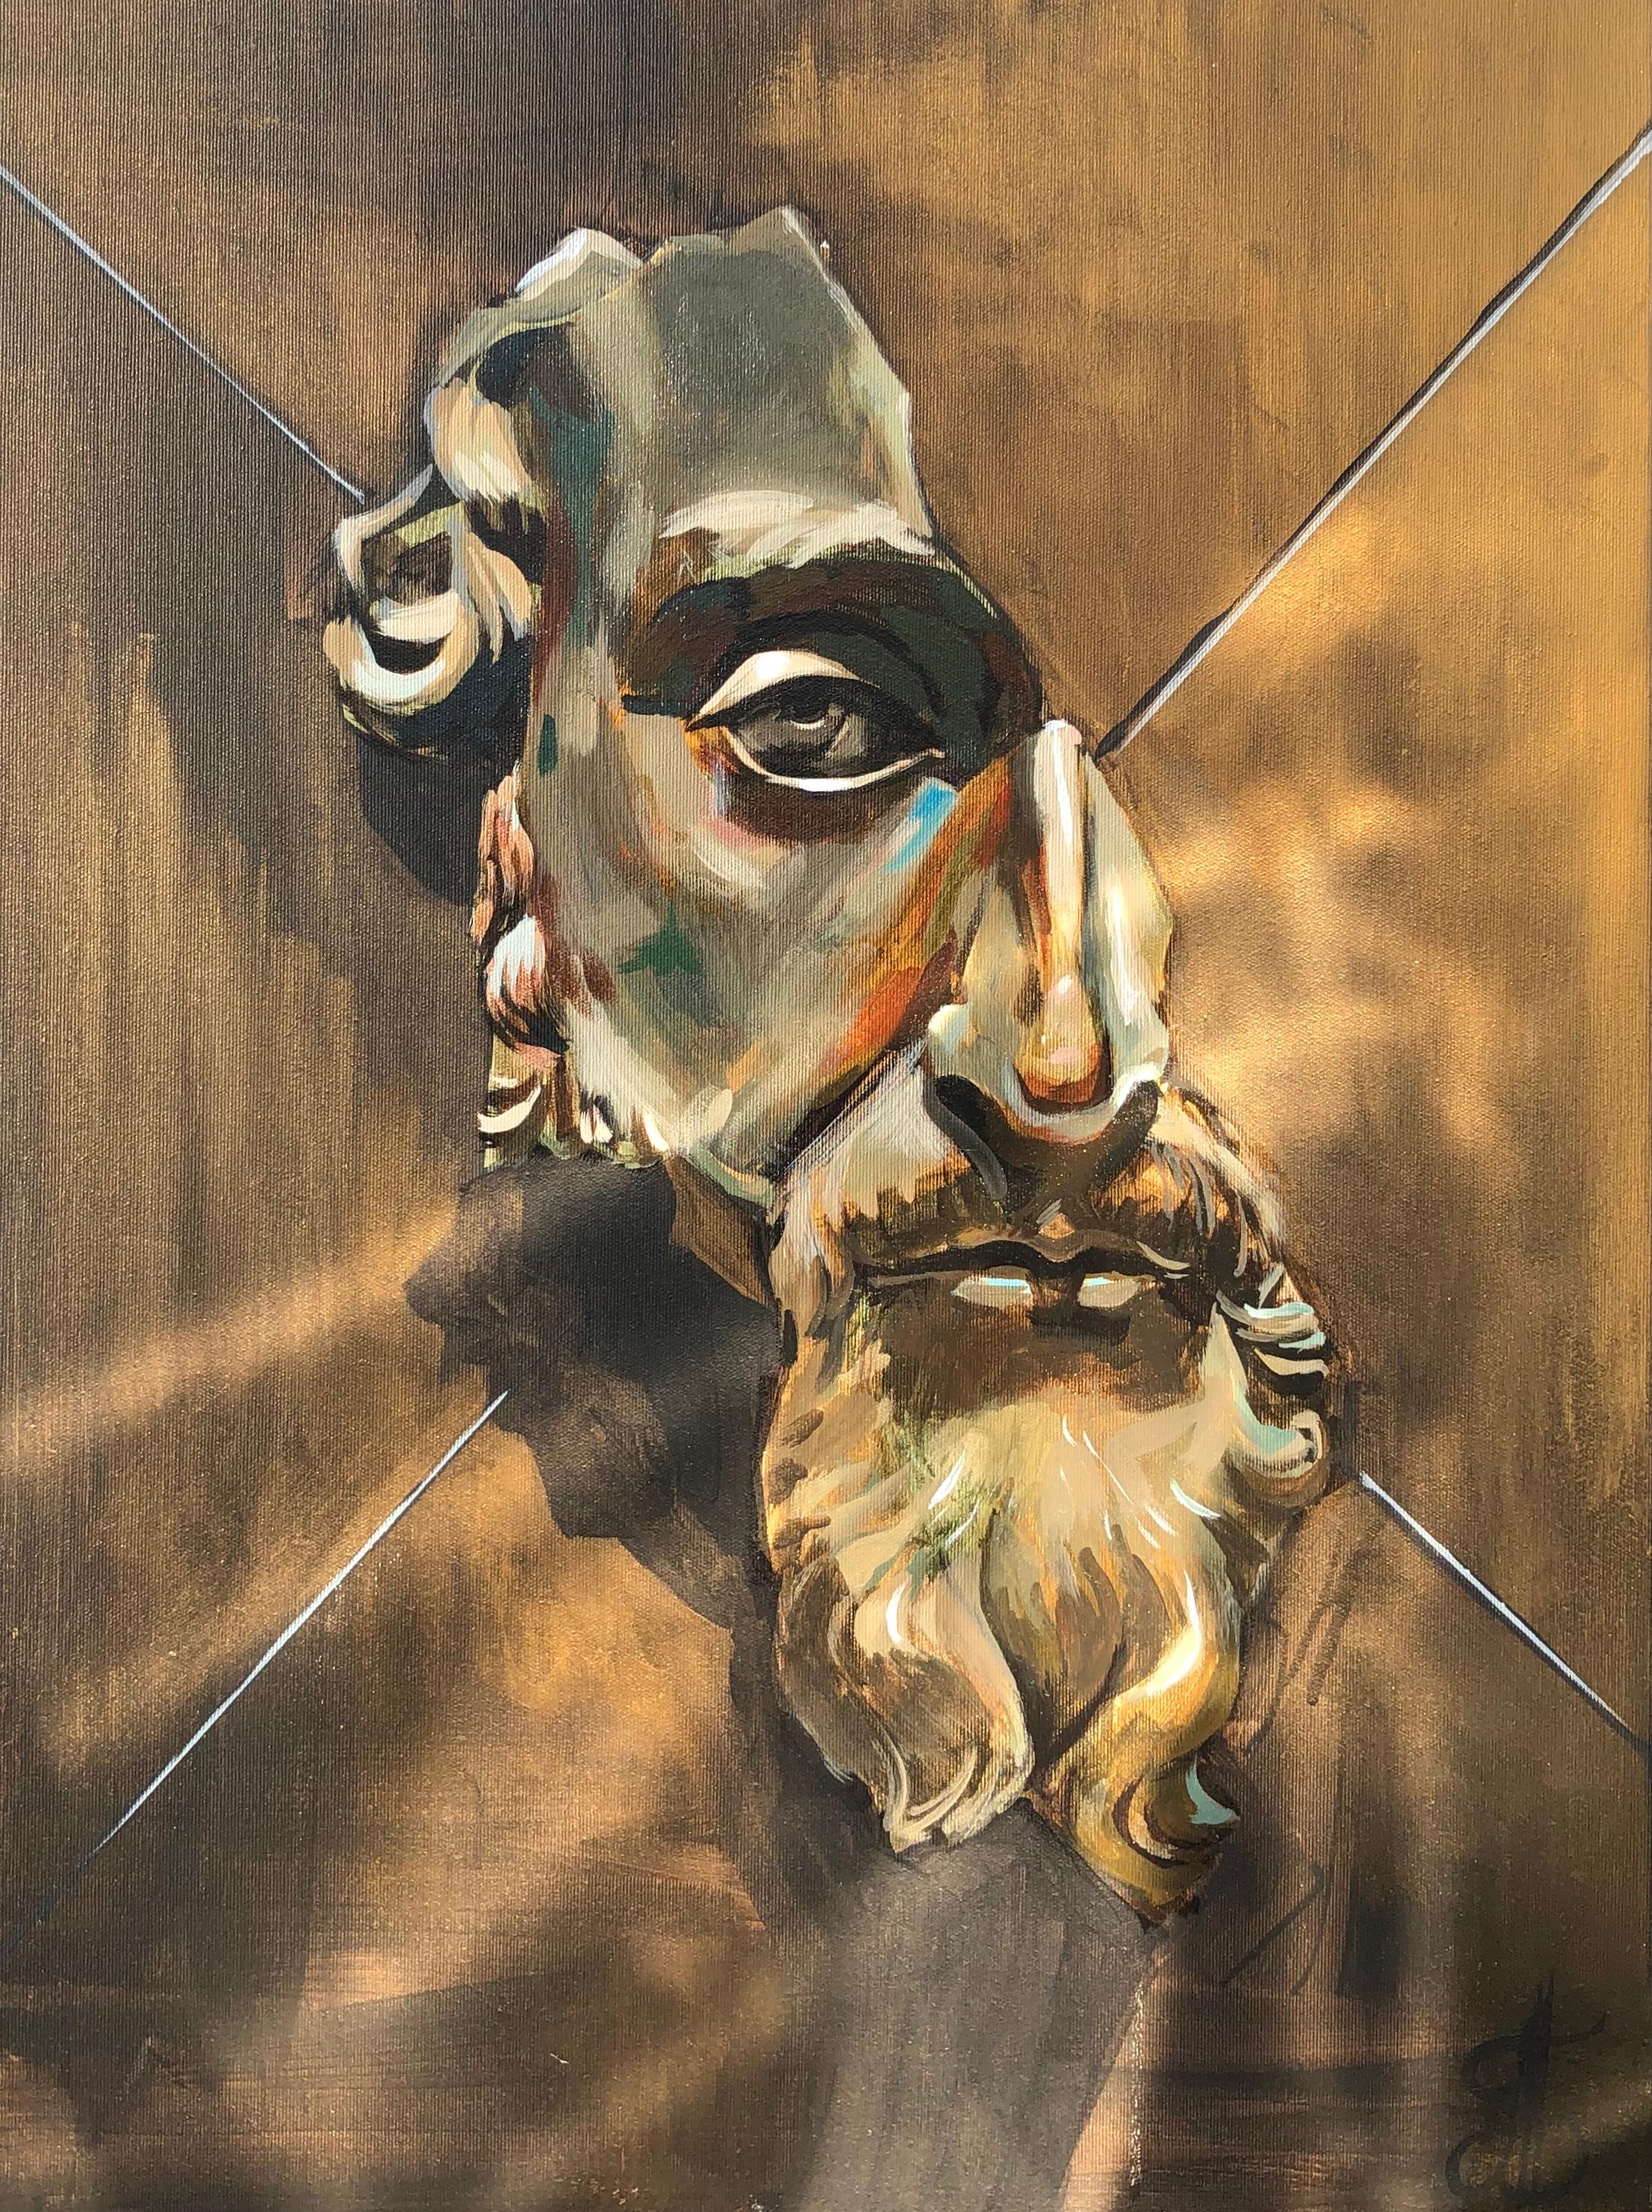 "The Bronze Mask" Acrylic on canvas 36" x 26" inch painting by Tom Barnabi